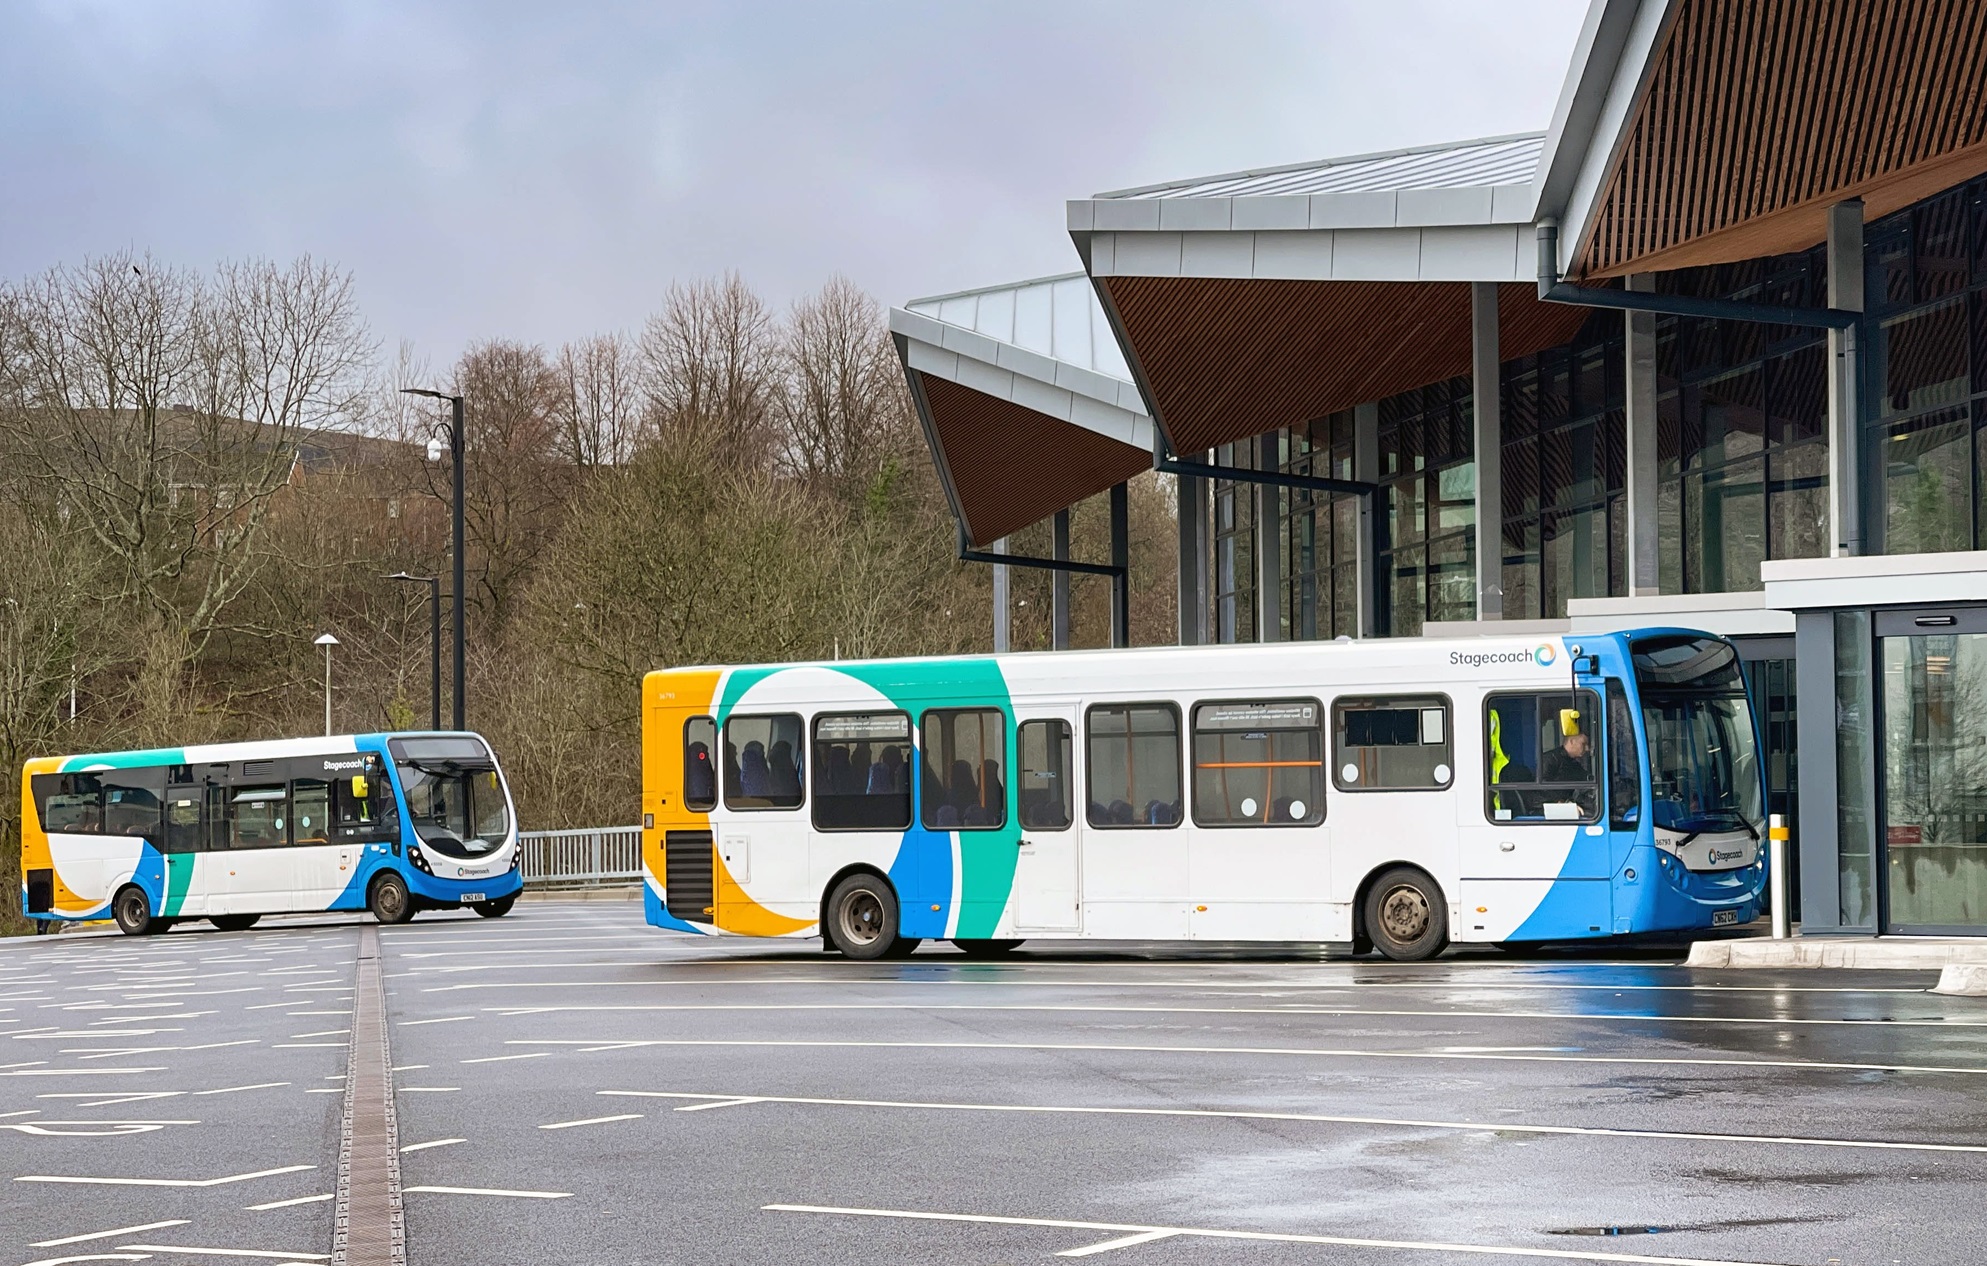 CPT advocates net cost bus franchising in Wales